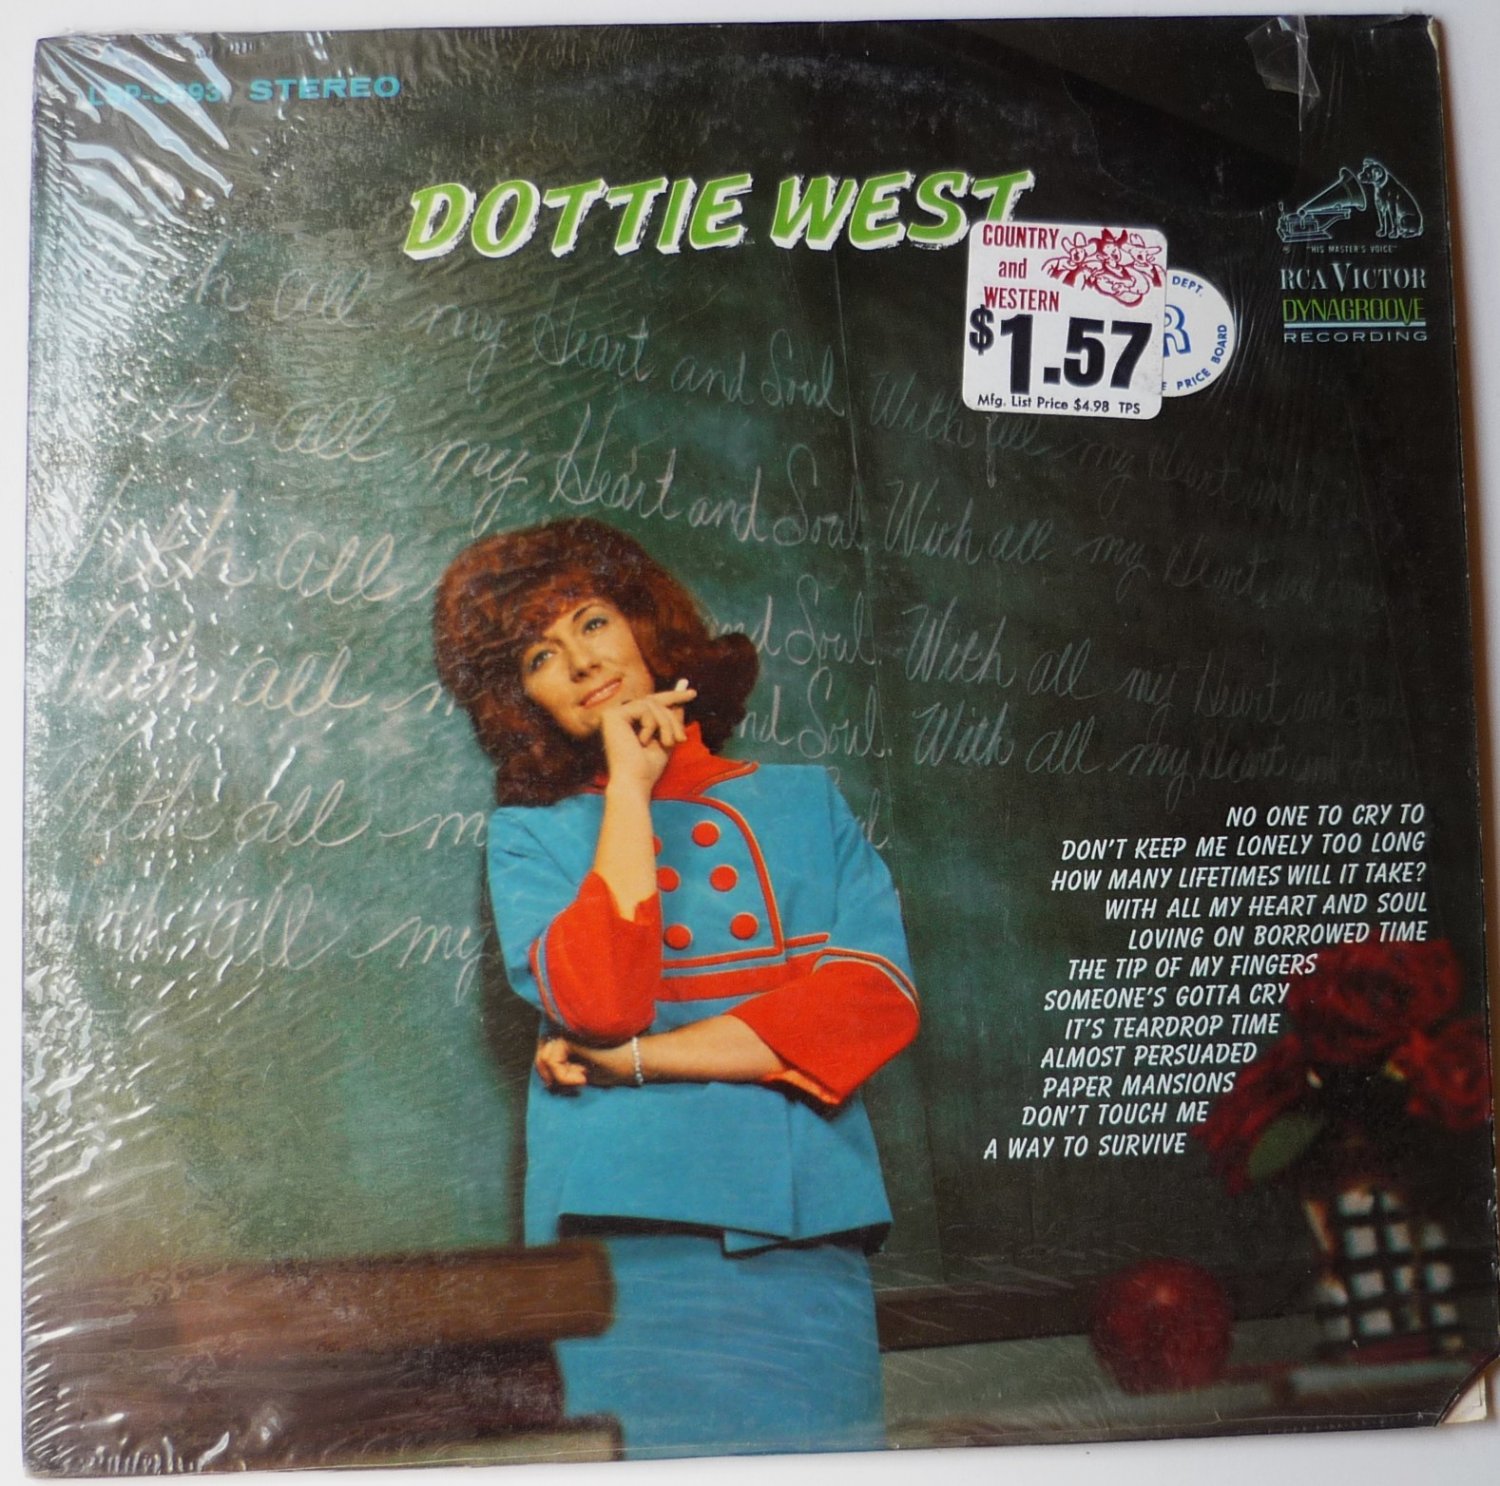 With All My Heart and Soul lp by Dottie West